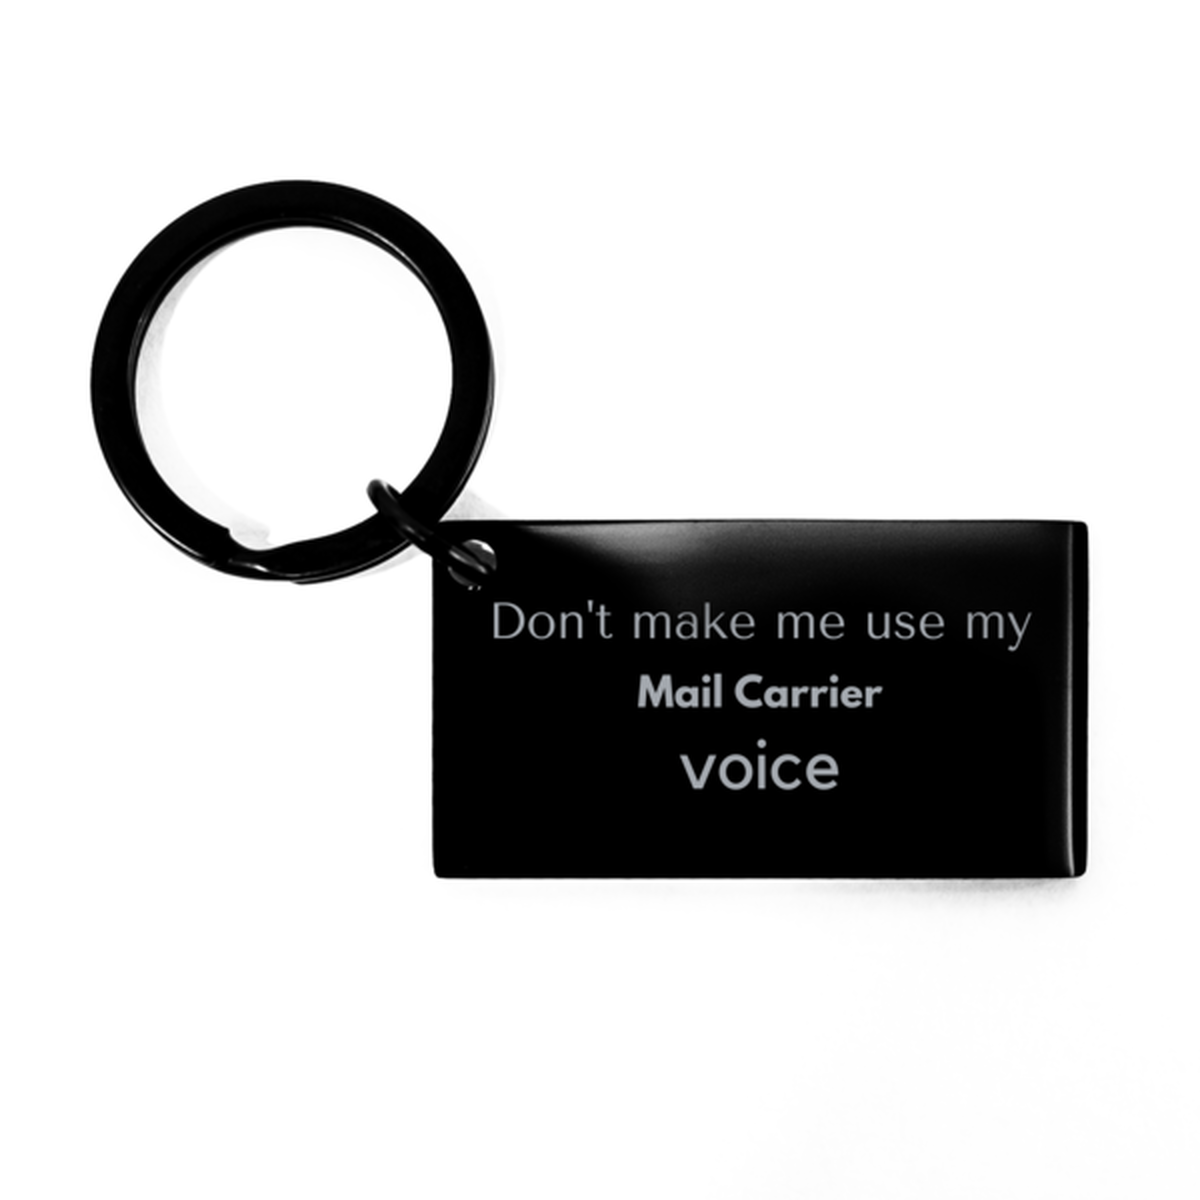 Don't make me use my Mail Carrier voice, Sarcasm Mail Carrier Gifts, Christmas Mail Carrier Keychain Birthday Unique Gifts For Mail Carrier Coworkers, Men, Women, Colleague, Friends